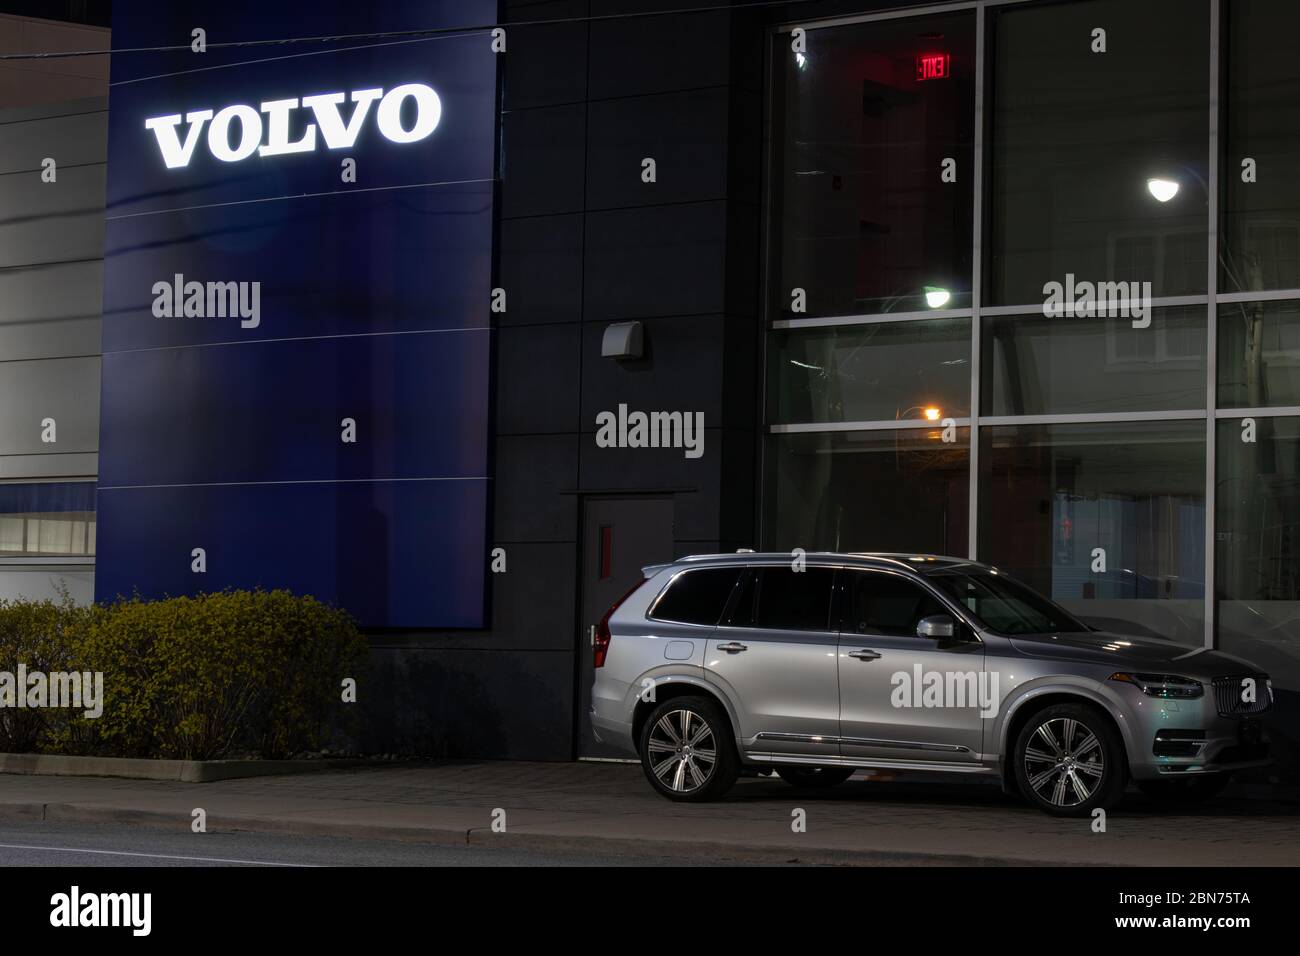 Volvo XC90 parked out-front of a Volvo Dealership in downtown Toronto. Volvo text logo on the building glowing at night. Stock Photo